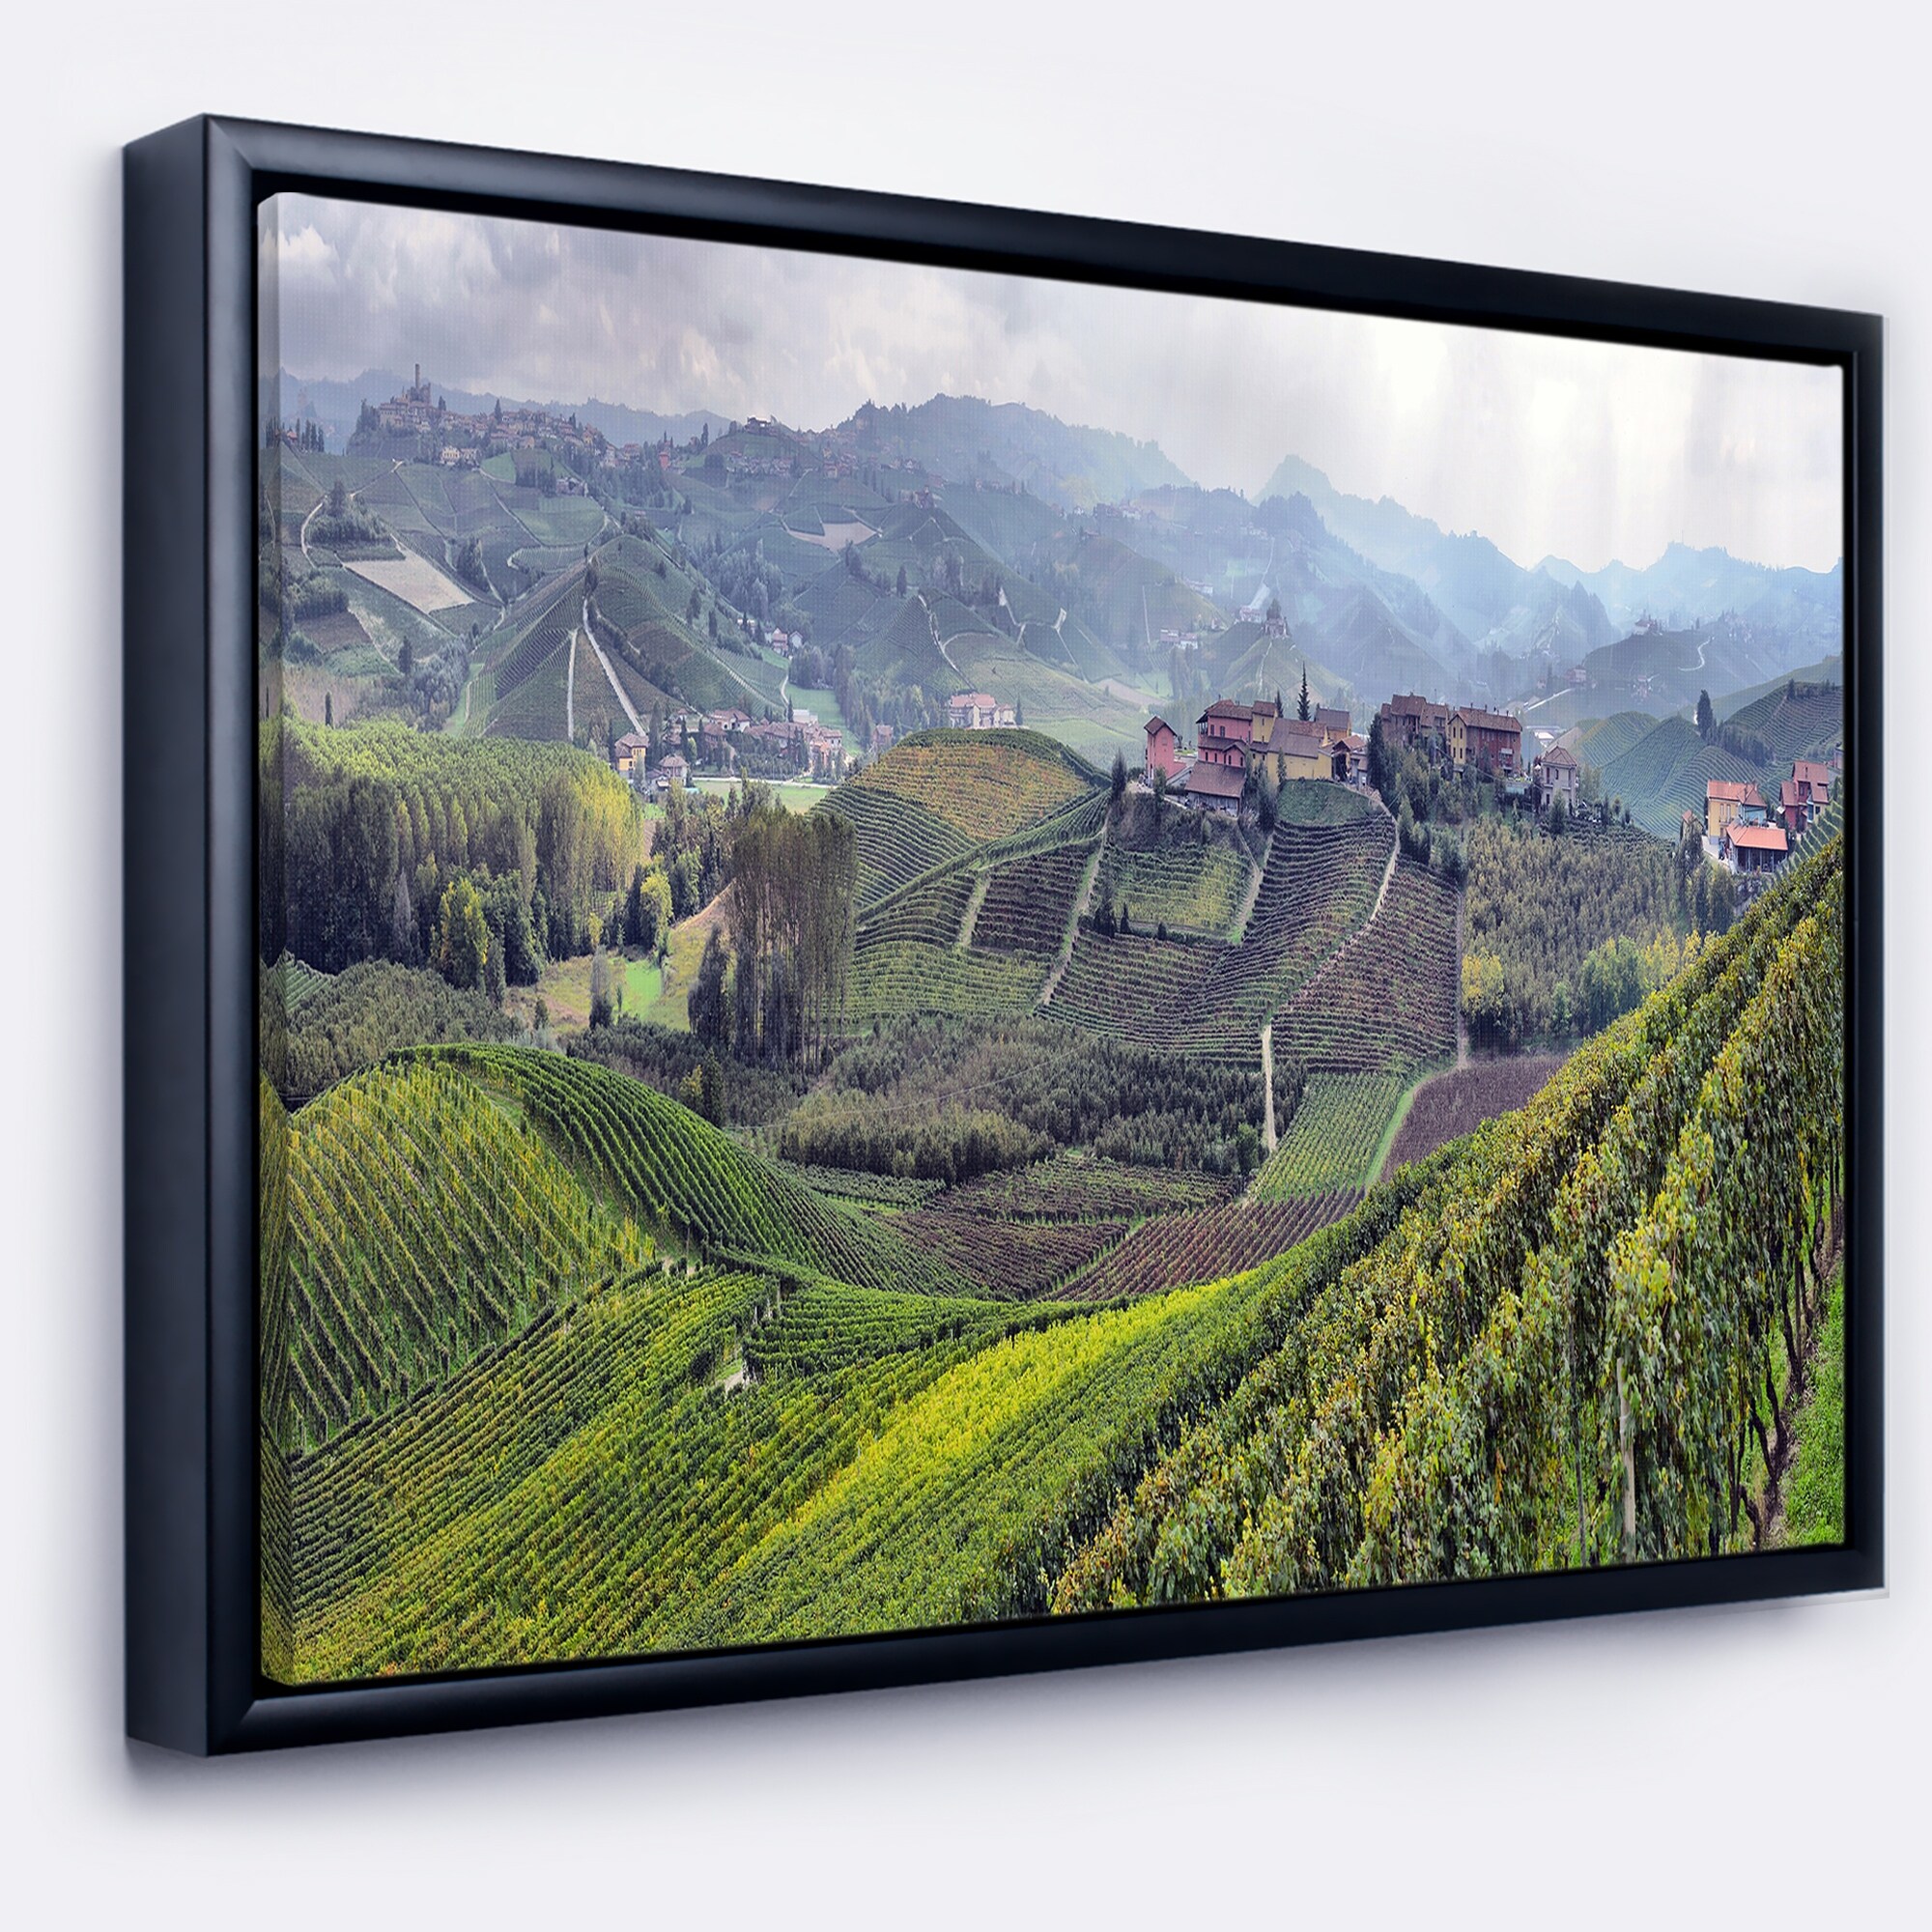 https://ak1.ostkcdn.com/images/products/is/images/direct/cb92df52f1d37e4aa7d2f085312ac8d1a4f80ba3/Designart-%27Vineyards-in-Italy-Panoramic%27-Photography-Framed-Canvas-Art-Print.jpg